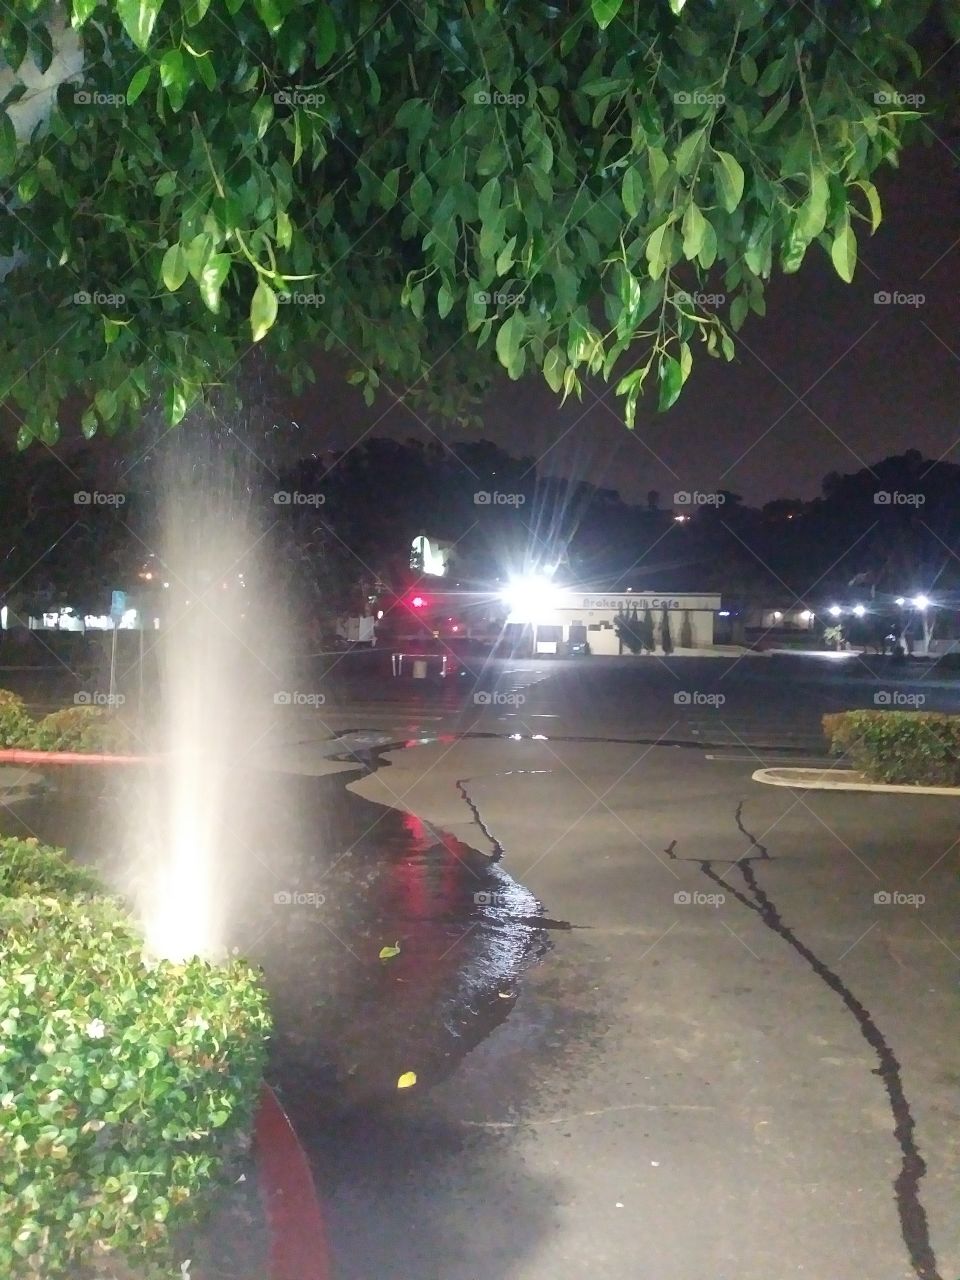 Apparently there is a water shortage in California so what kind of influence does a irrigation main line thats clearly busted have when its located in the middle of Mission Valley shopping mall? a very public place for a very public issue.